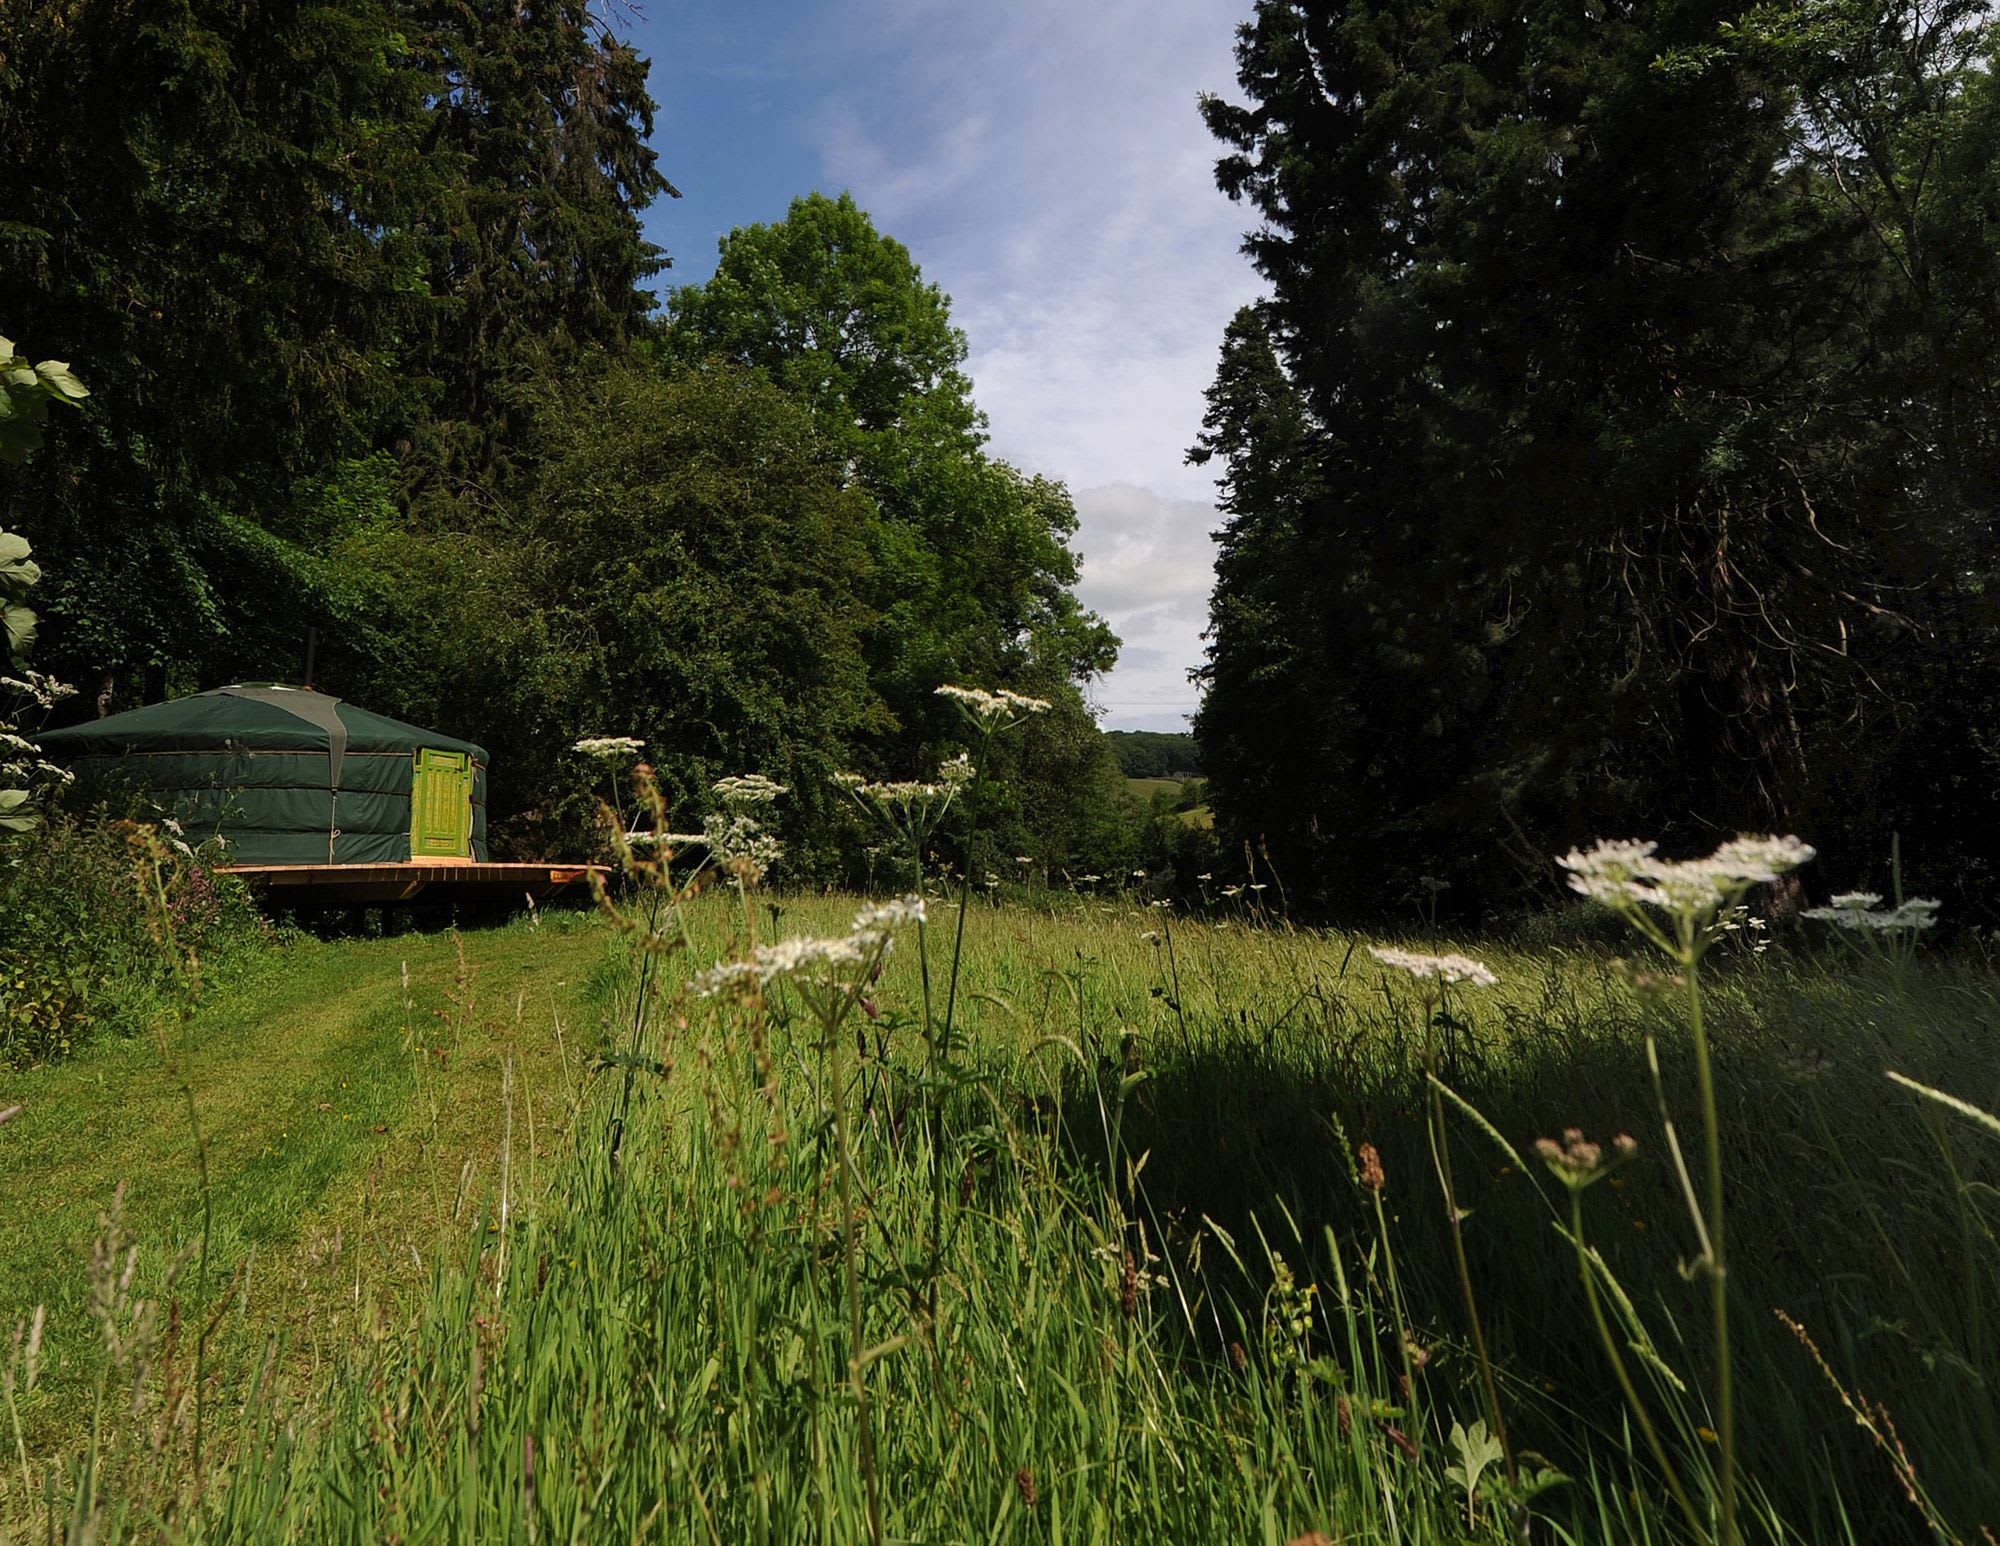 A family-run, eco-friendly glamping site set in 25 acres of woodland on the beautiful Welsh borders.